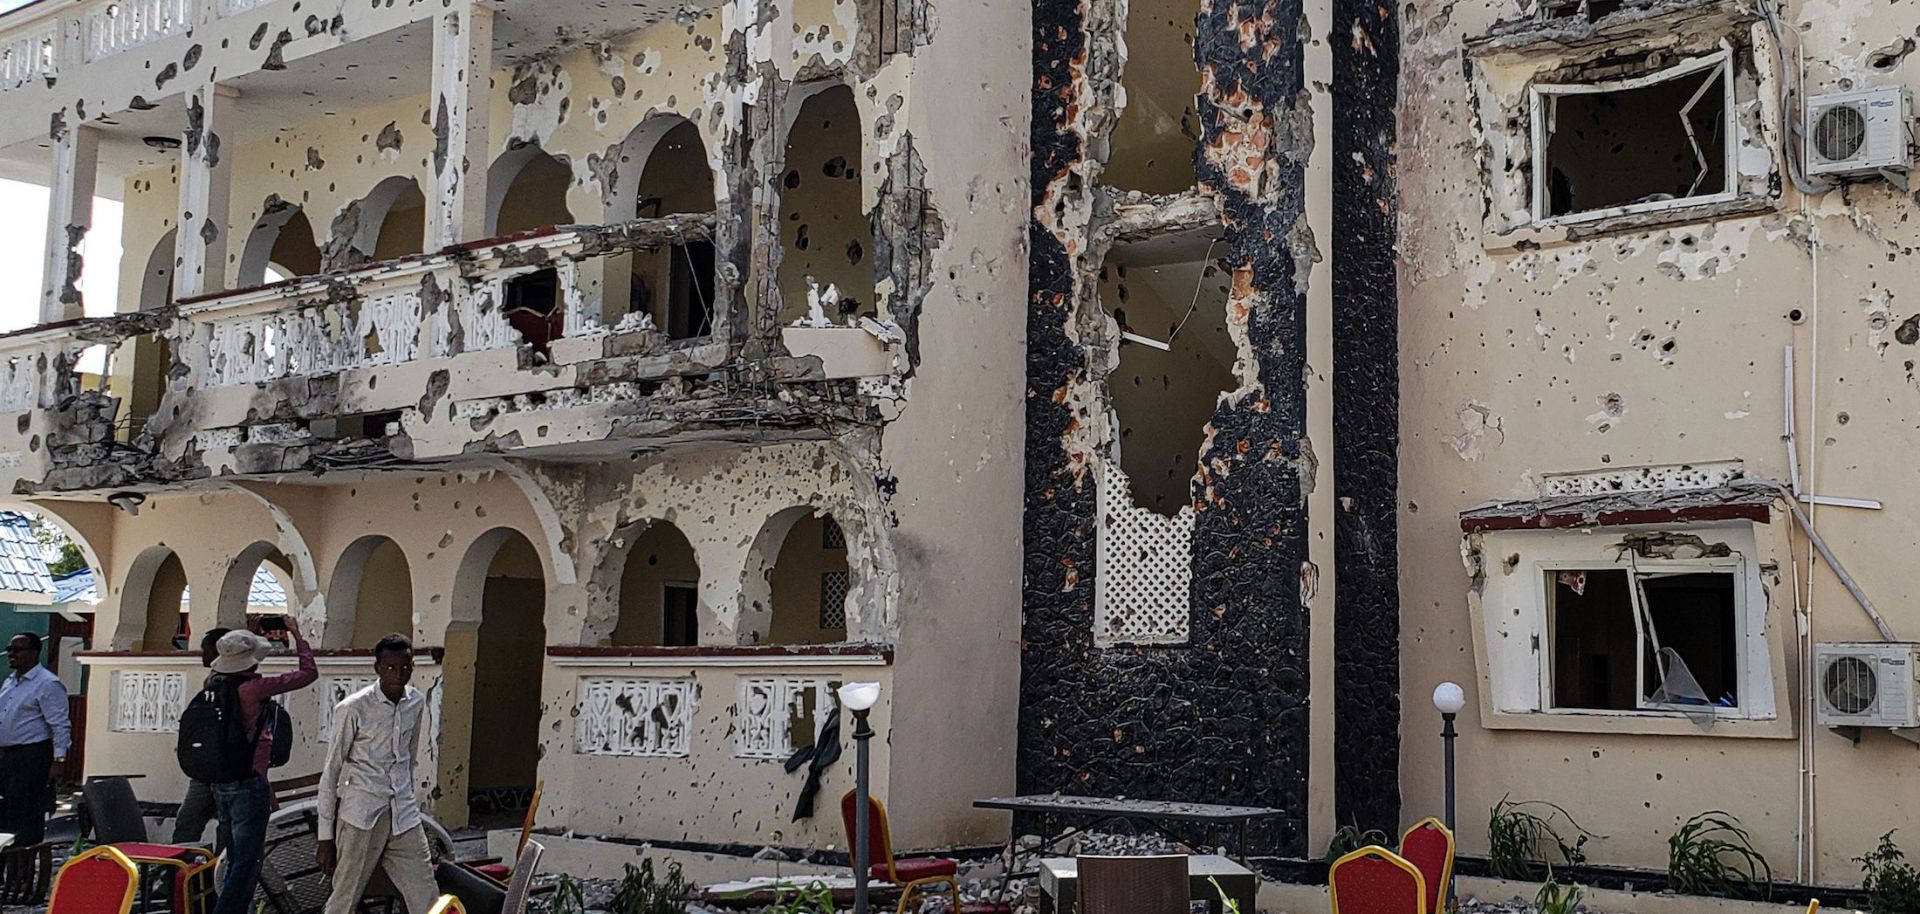 A hotel in the Somalian city of Kismayo on July 13, 2019, a day after at least 26 people, including several foreigners, were killed and 56 people were injured in a suicide bomb and gun attack claimed by al Shabaab militants.